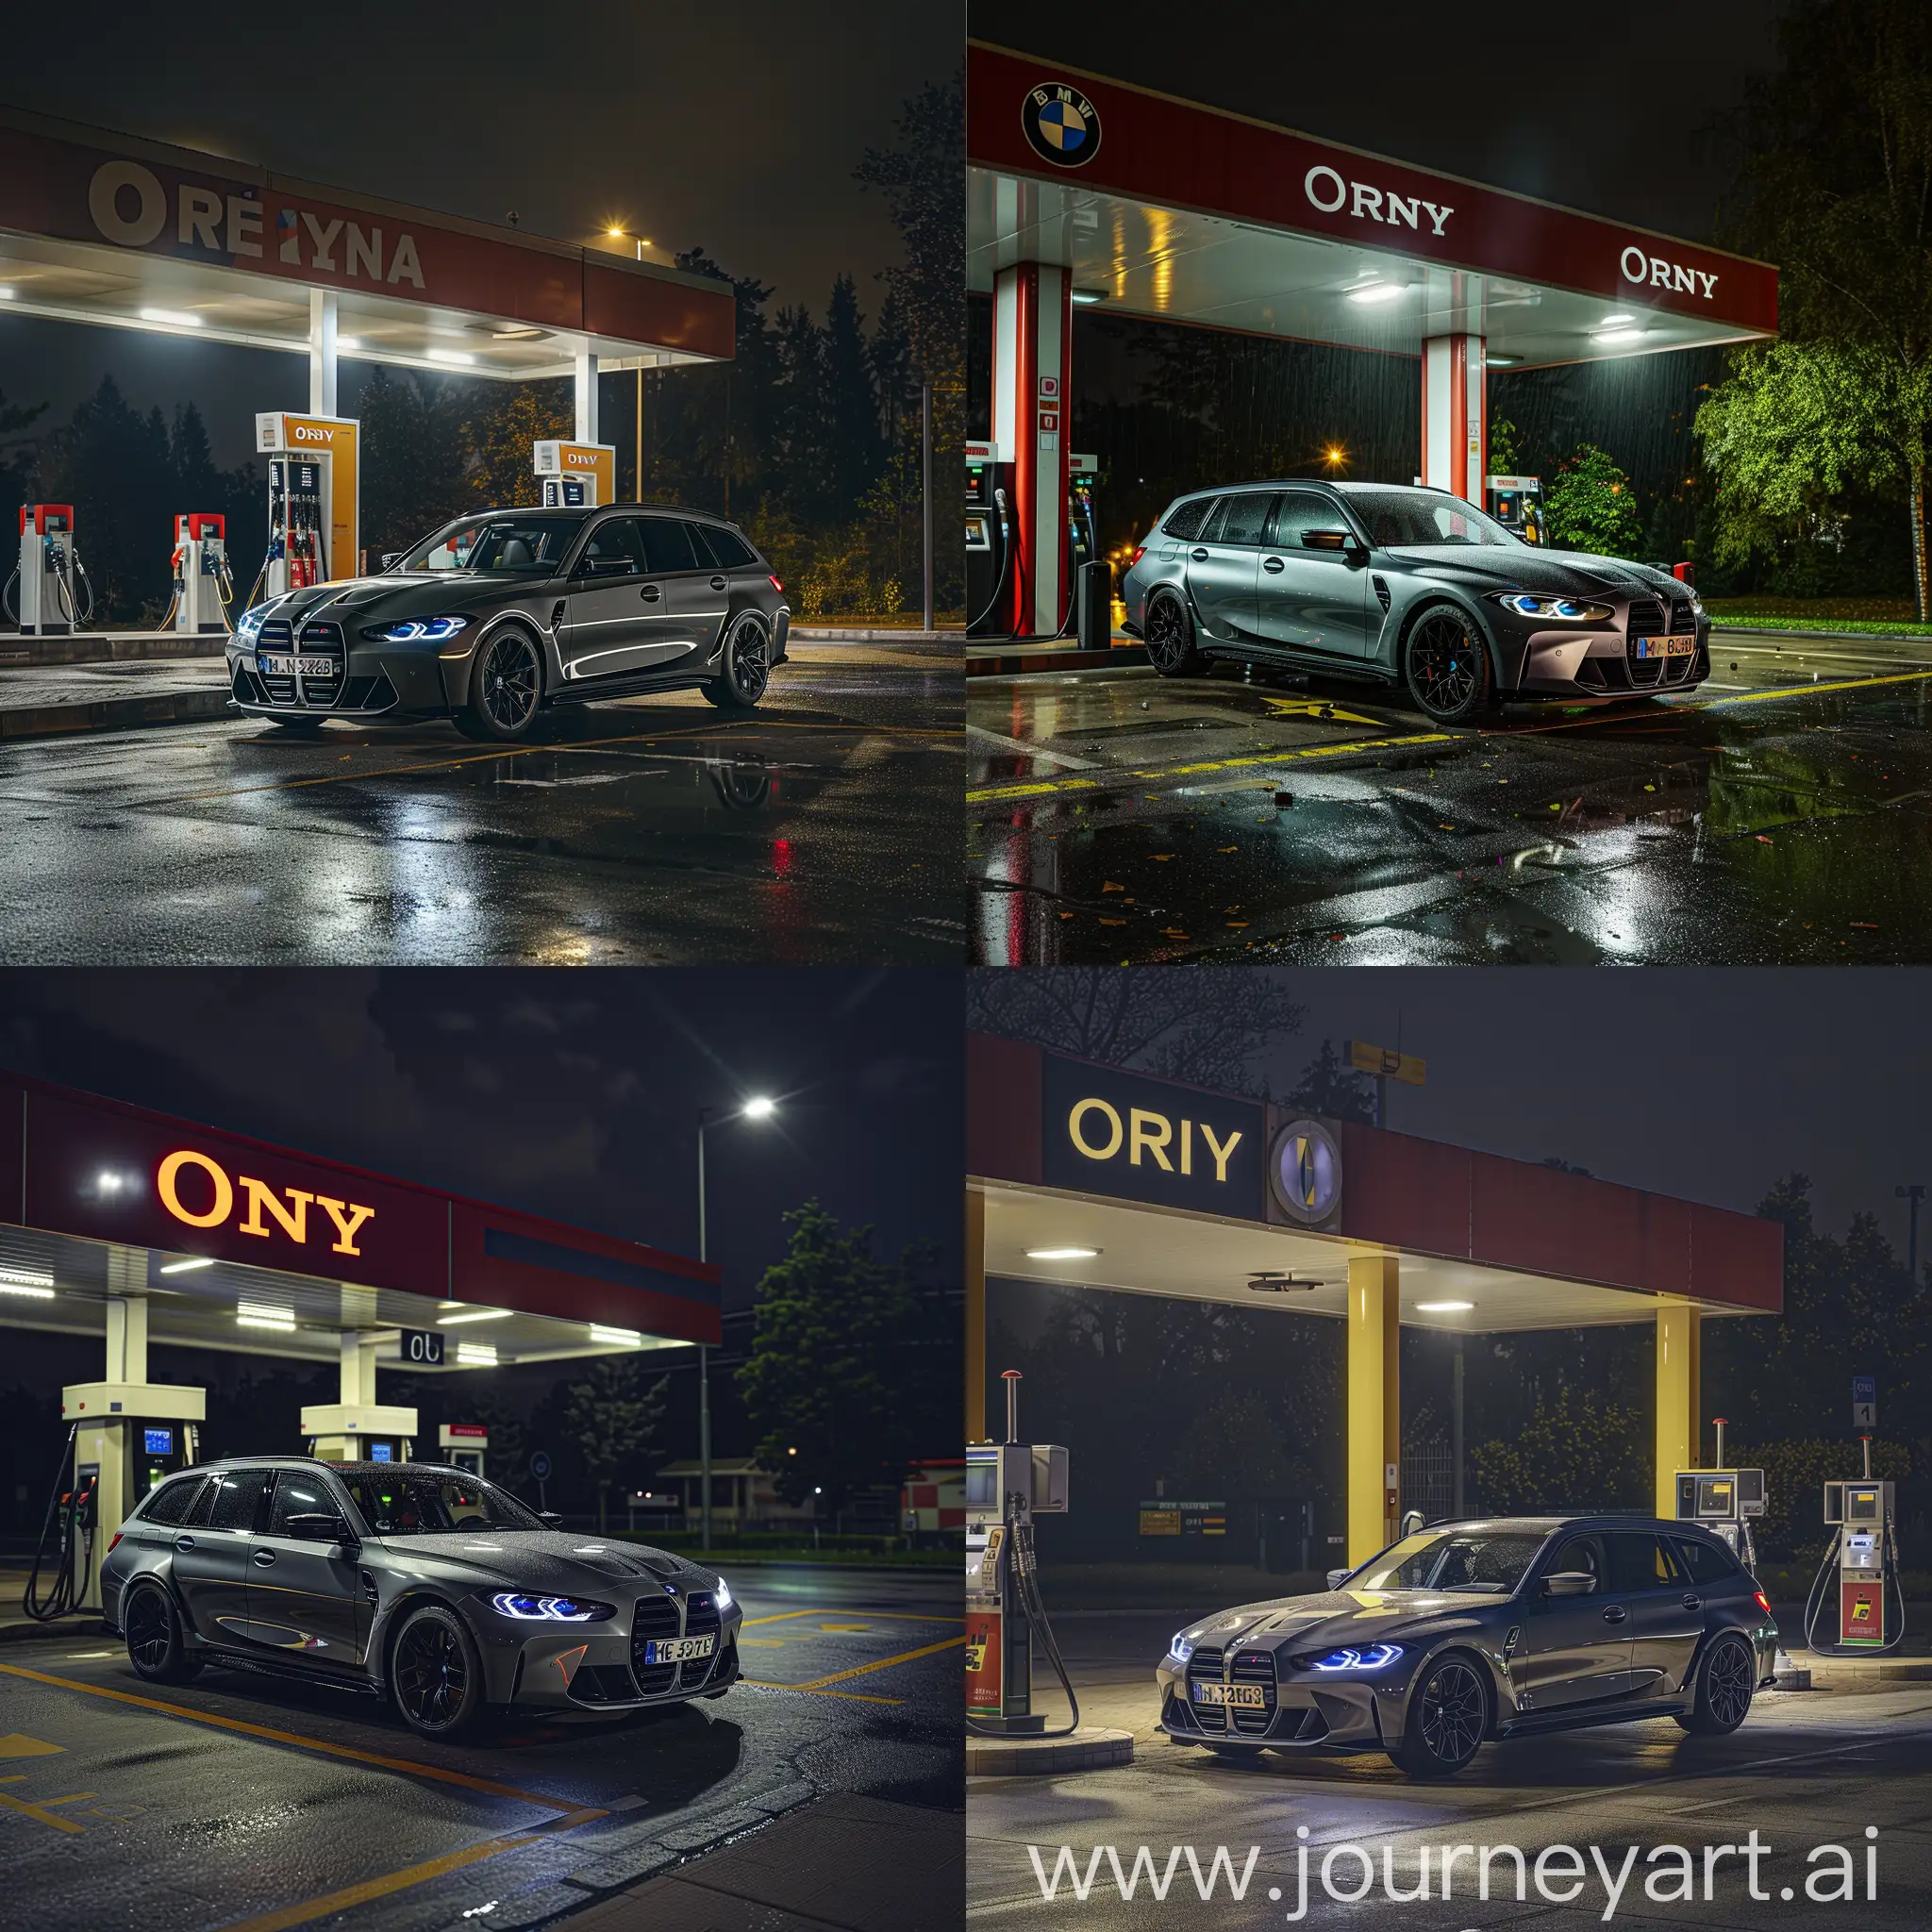 Create a realistic night-time photograph with a Sony Alpha camera using a 200mm lens, finely tuned for optimal settings. The subject is a 2023 gray BMW M3 Touring, parked at an Orlen fuel station in Poland. The scene, captured at night, is illuminated by the LED lights of the car, casting a bright glow on the surroundings. The sunny weather is not visible in the image due to the nocturnal setting, but the station lights and the car's LEDs create a vivid and dynamic atmosphere. --v 6.0
